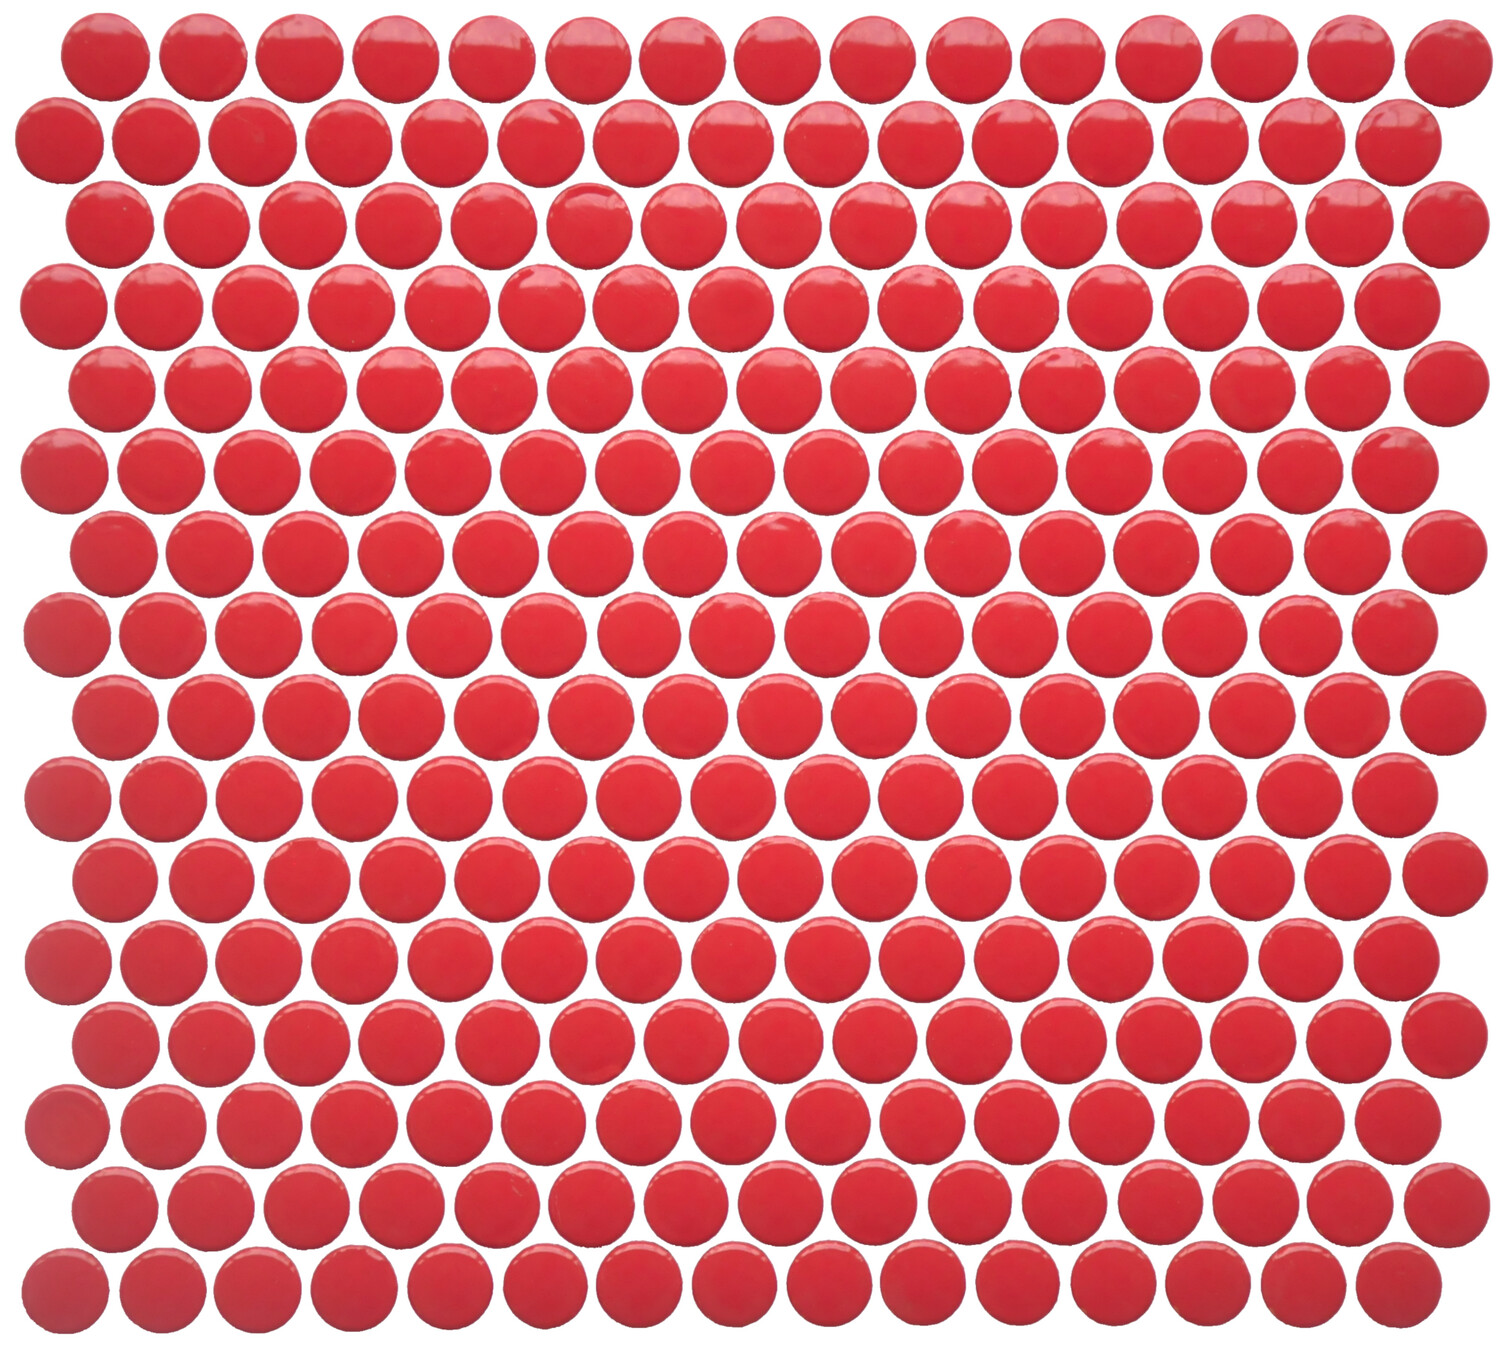 BG RED PEPPER PENNY ROUND MOS 12X12